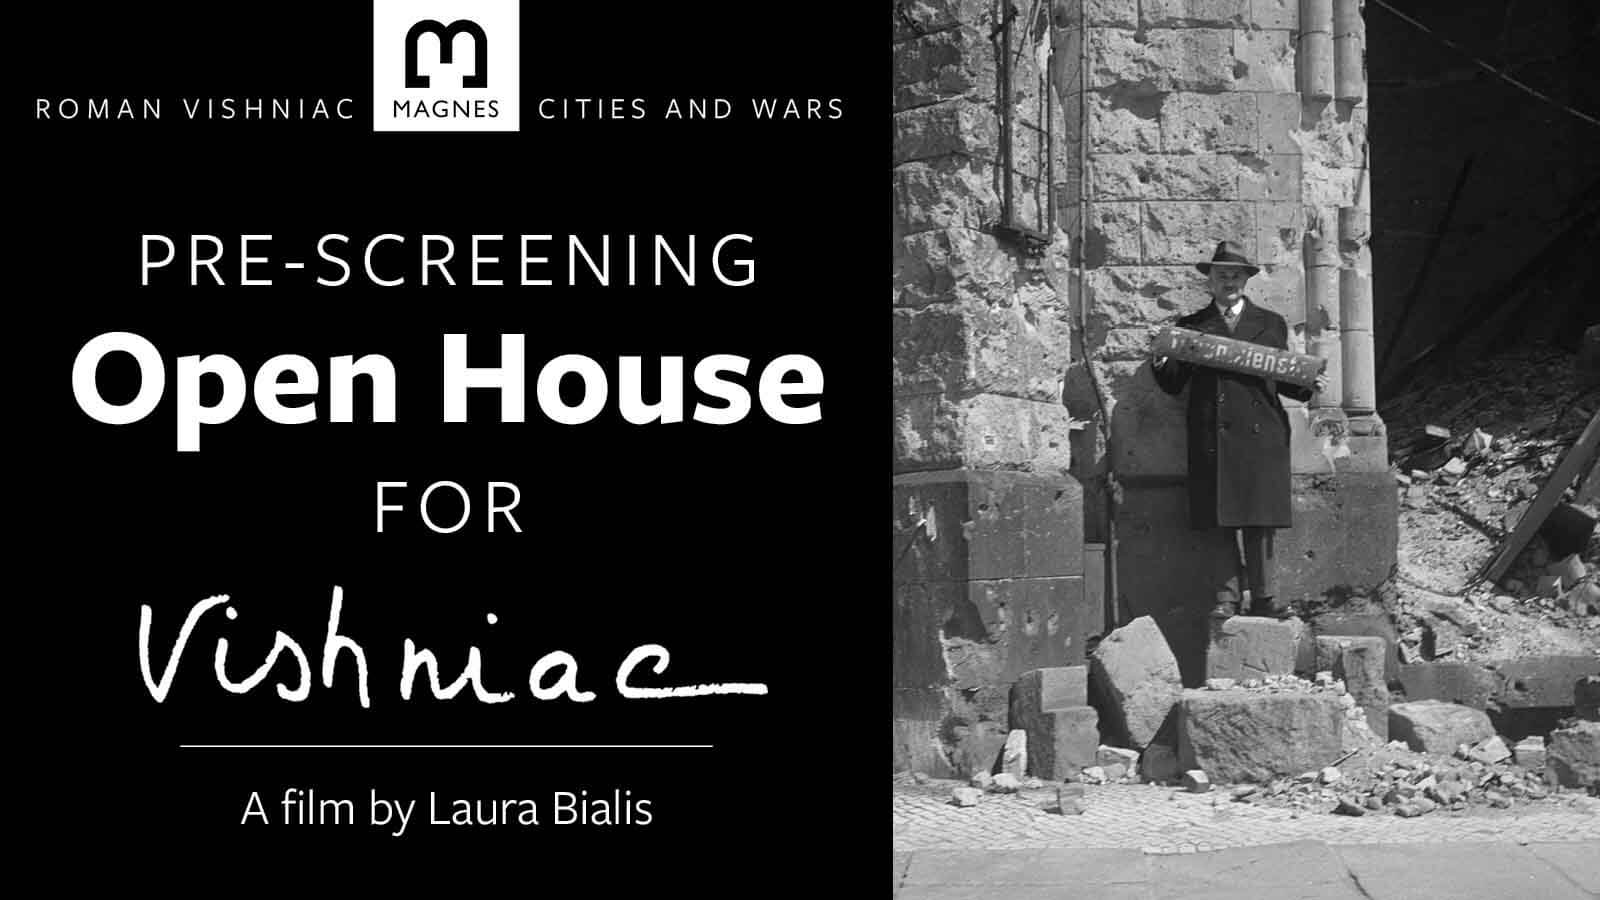 On left: black background with white text: Roman Vishniac, Magnes logo, Cities and Wars, Pre-screening Open House for "Vishniac" a film by Laura Bialai. On right: black and white photograph of man in trenchcoat holding a handmade wooden sign in front of a building in rubble.